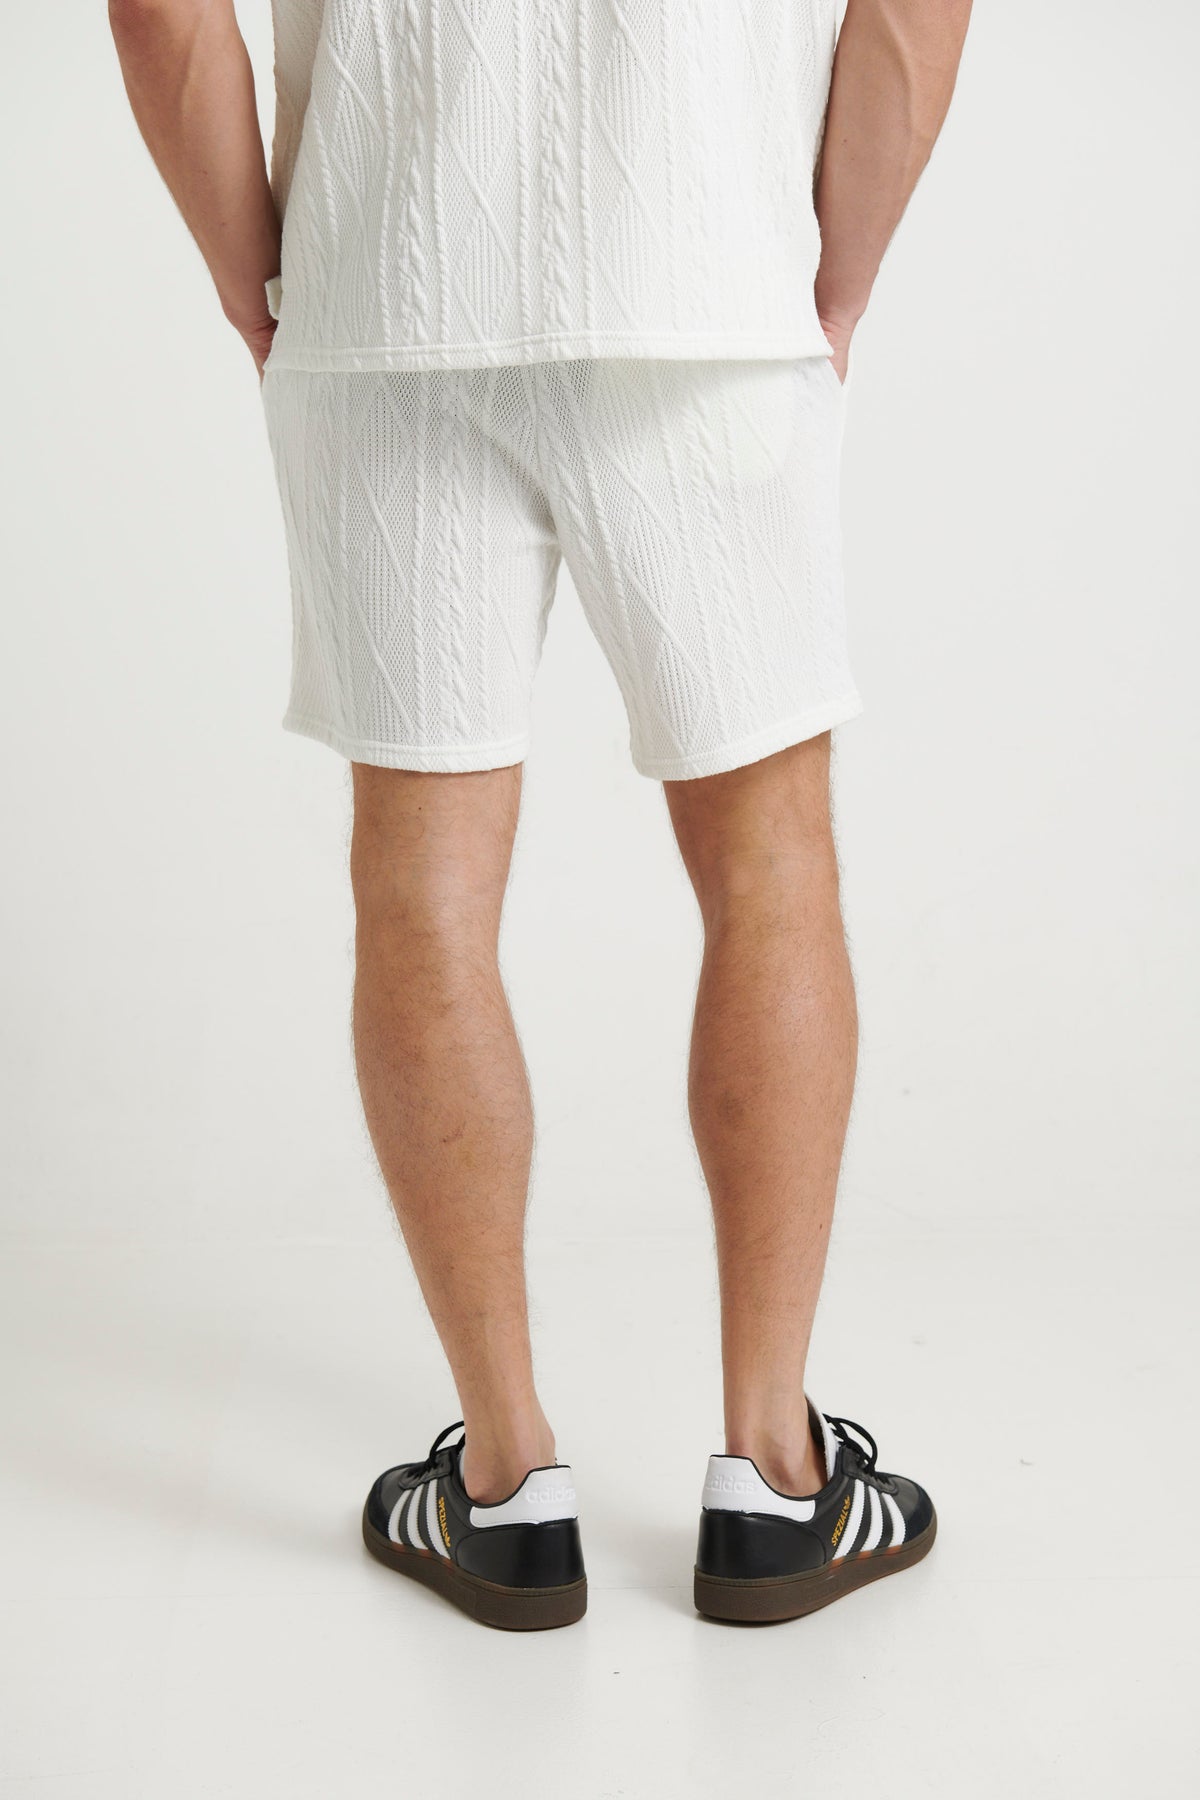 Locky Knitted Texture Short White